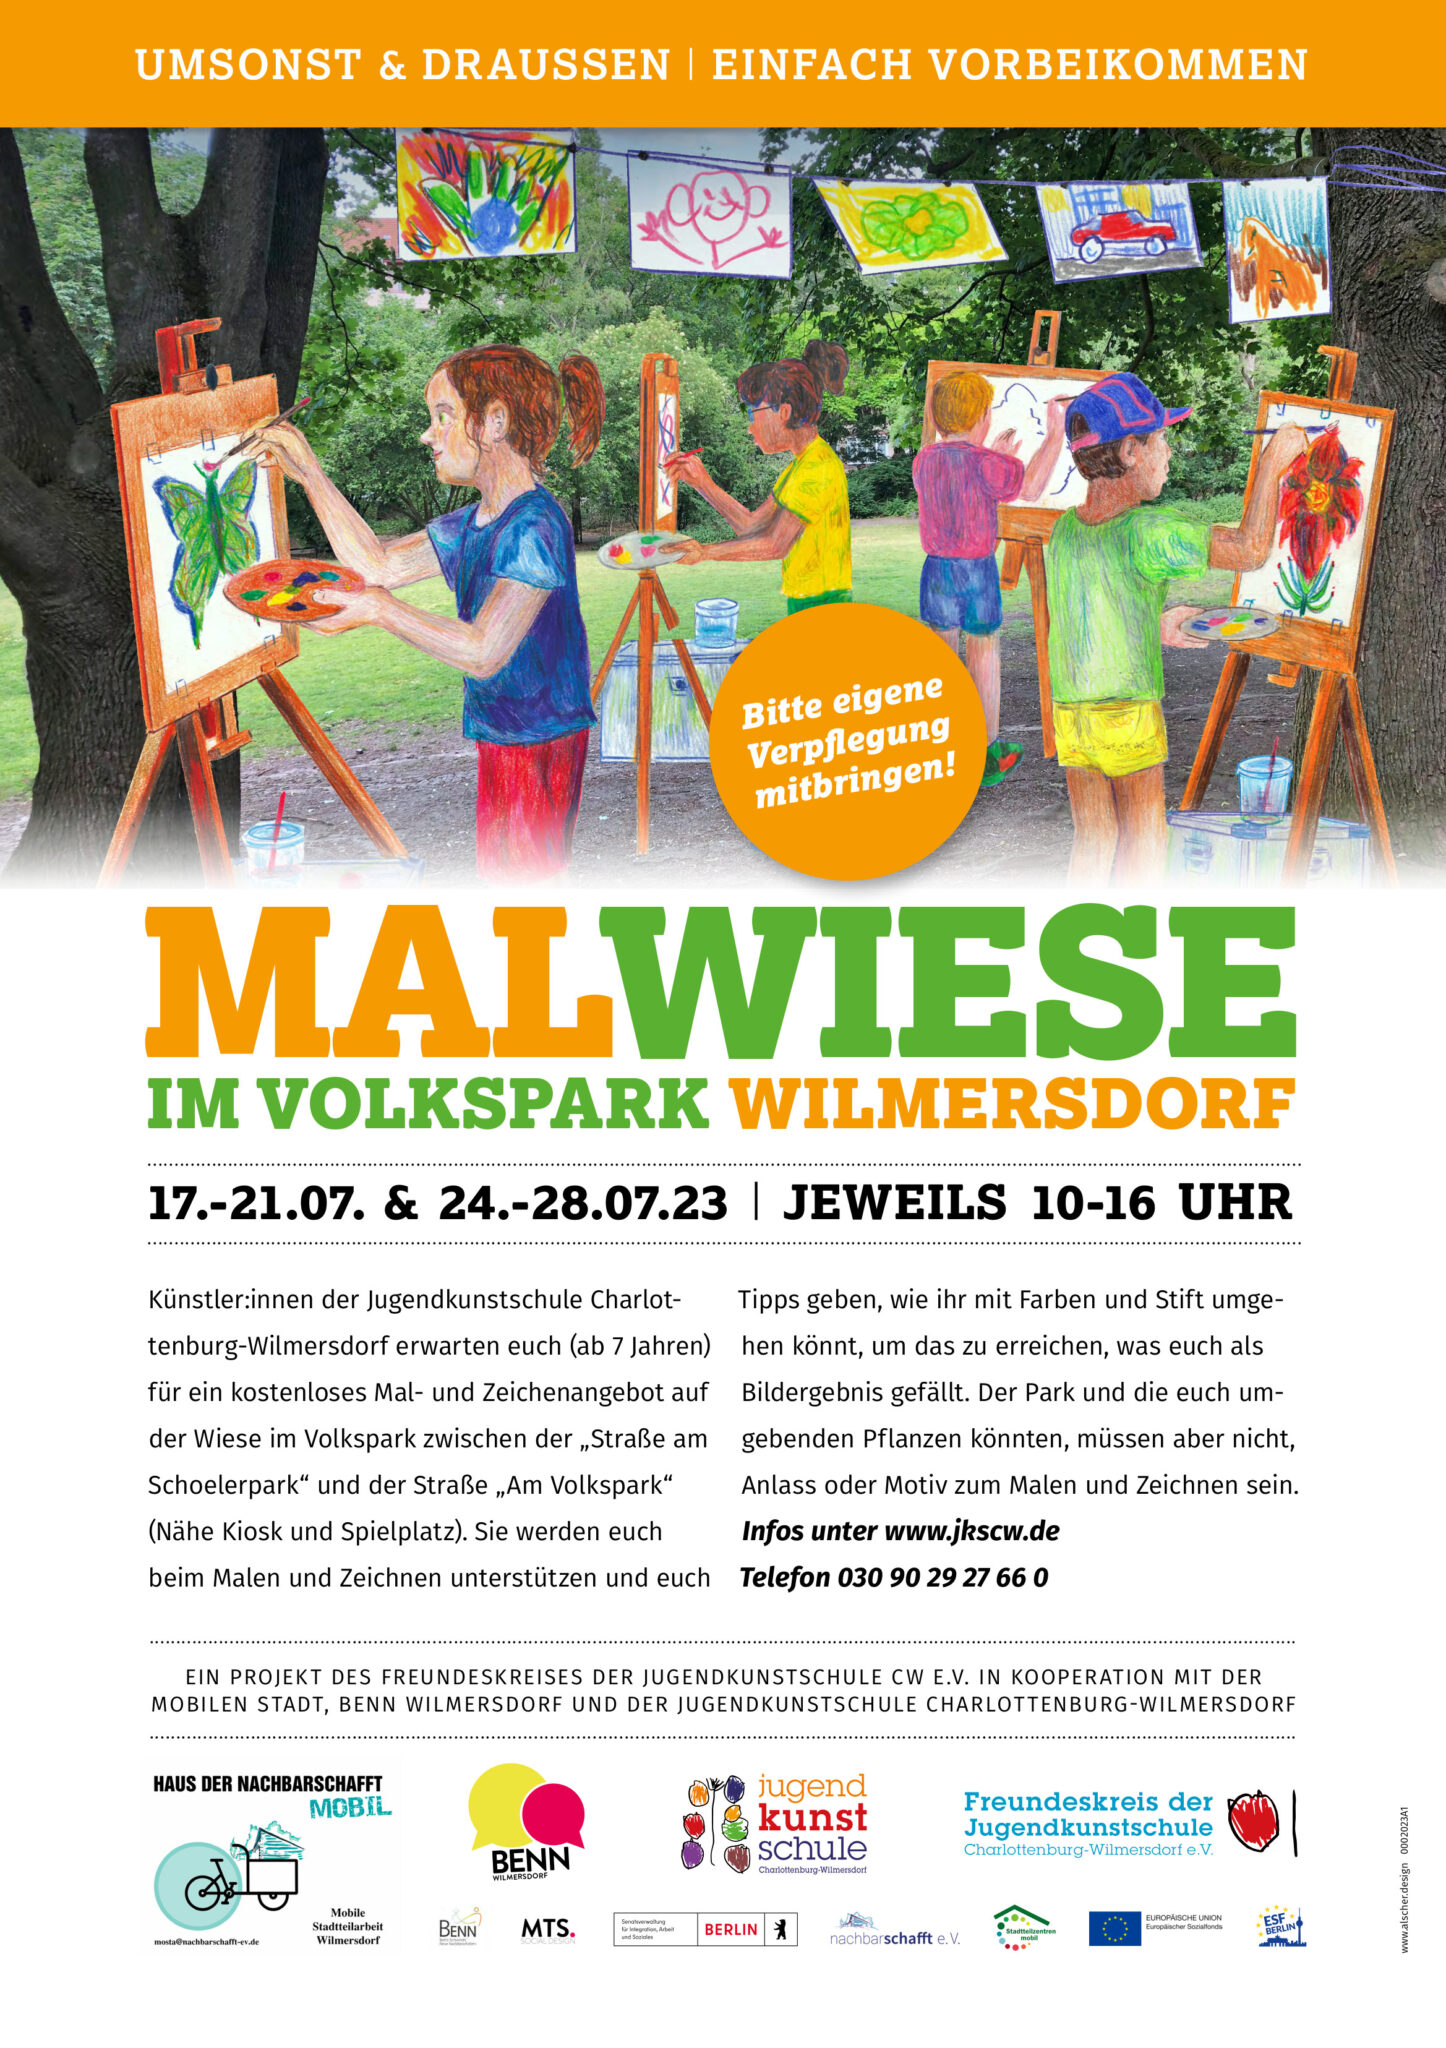 You are currently viewing Malwiese im Volkspark Wilmersdorf